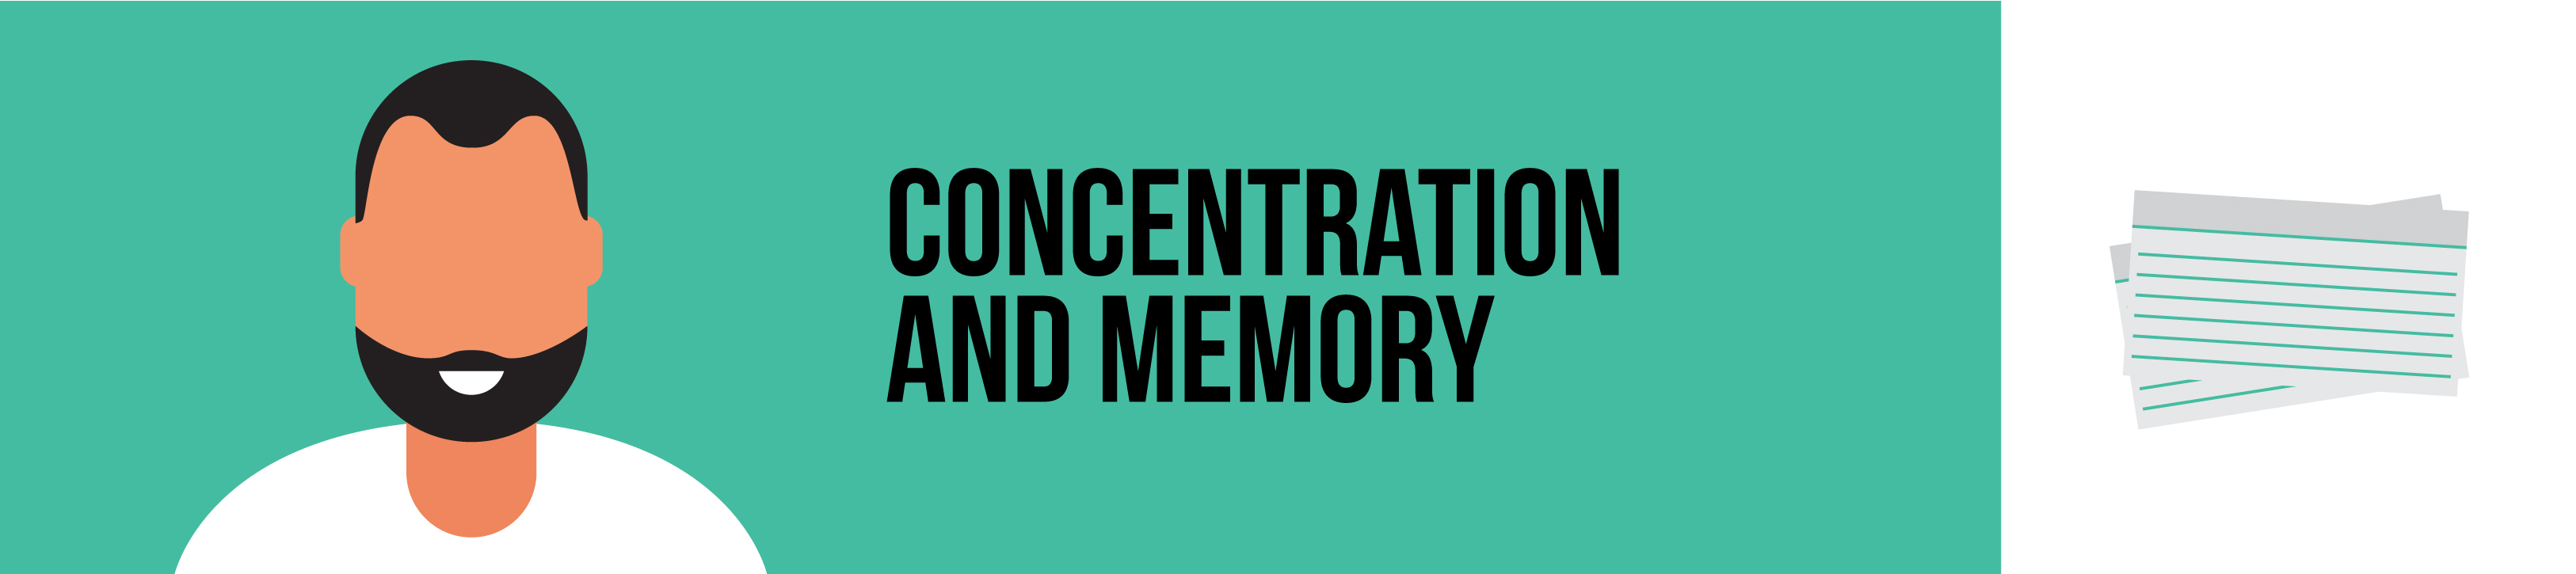 concentration and memory